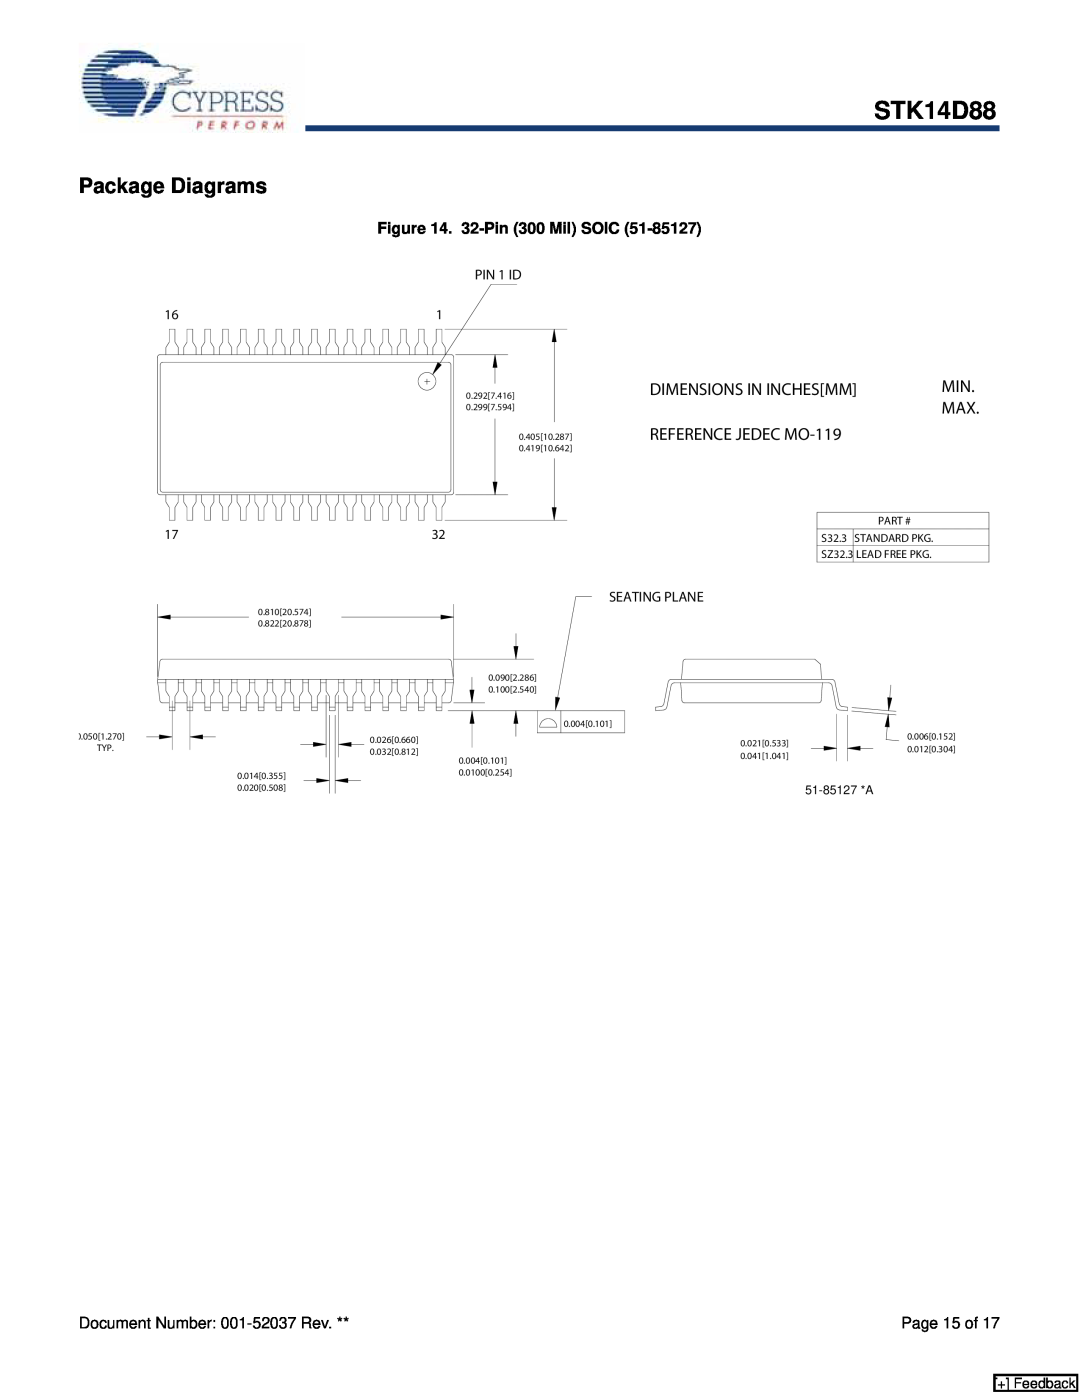 Cypress STK14D88 manual Package Diagrams, Dimensions In Inchesmm, REFERENCE JEDEC MO-119, + Feedback 